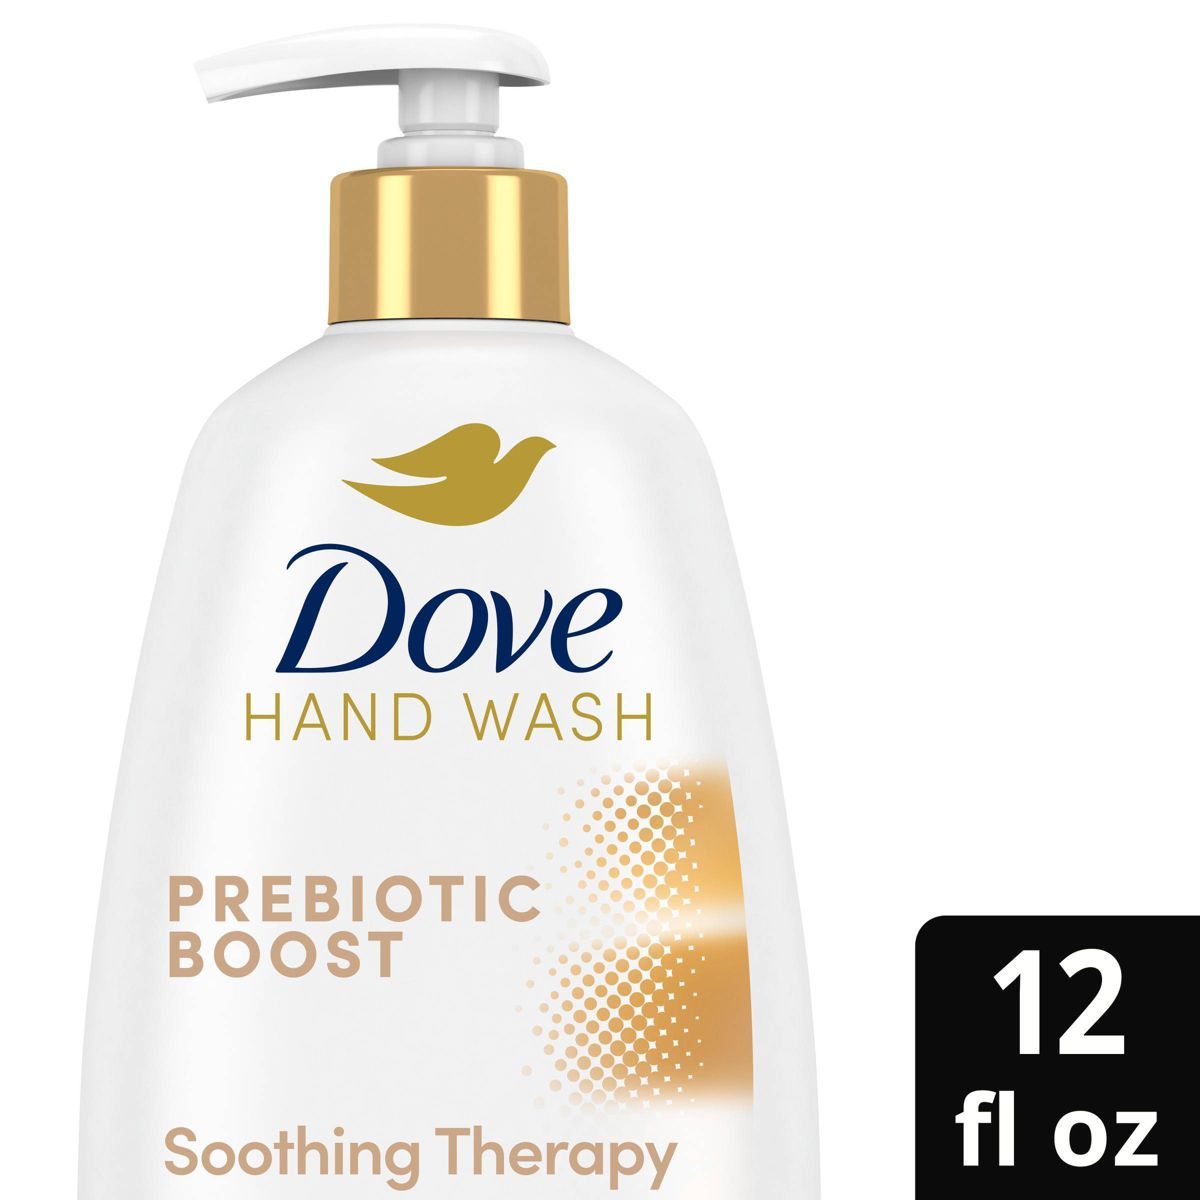 Dove Beauty Prebiotic Soothing Therapy Gel Hand Soap - 12 fl oz | Target